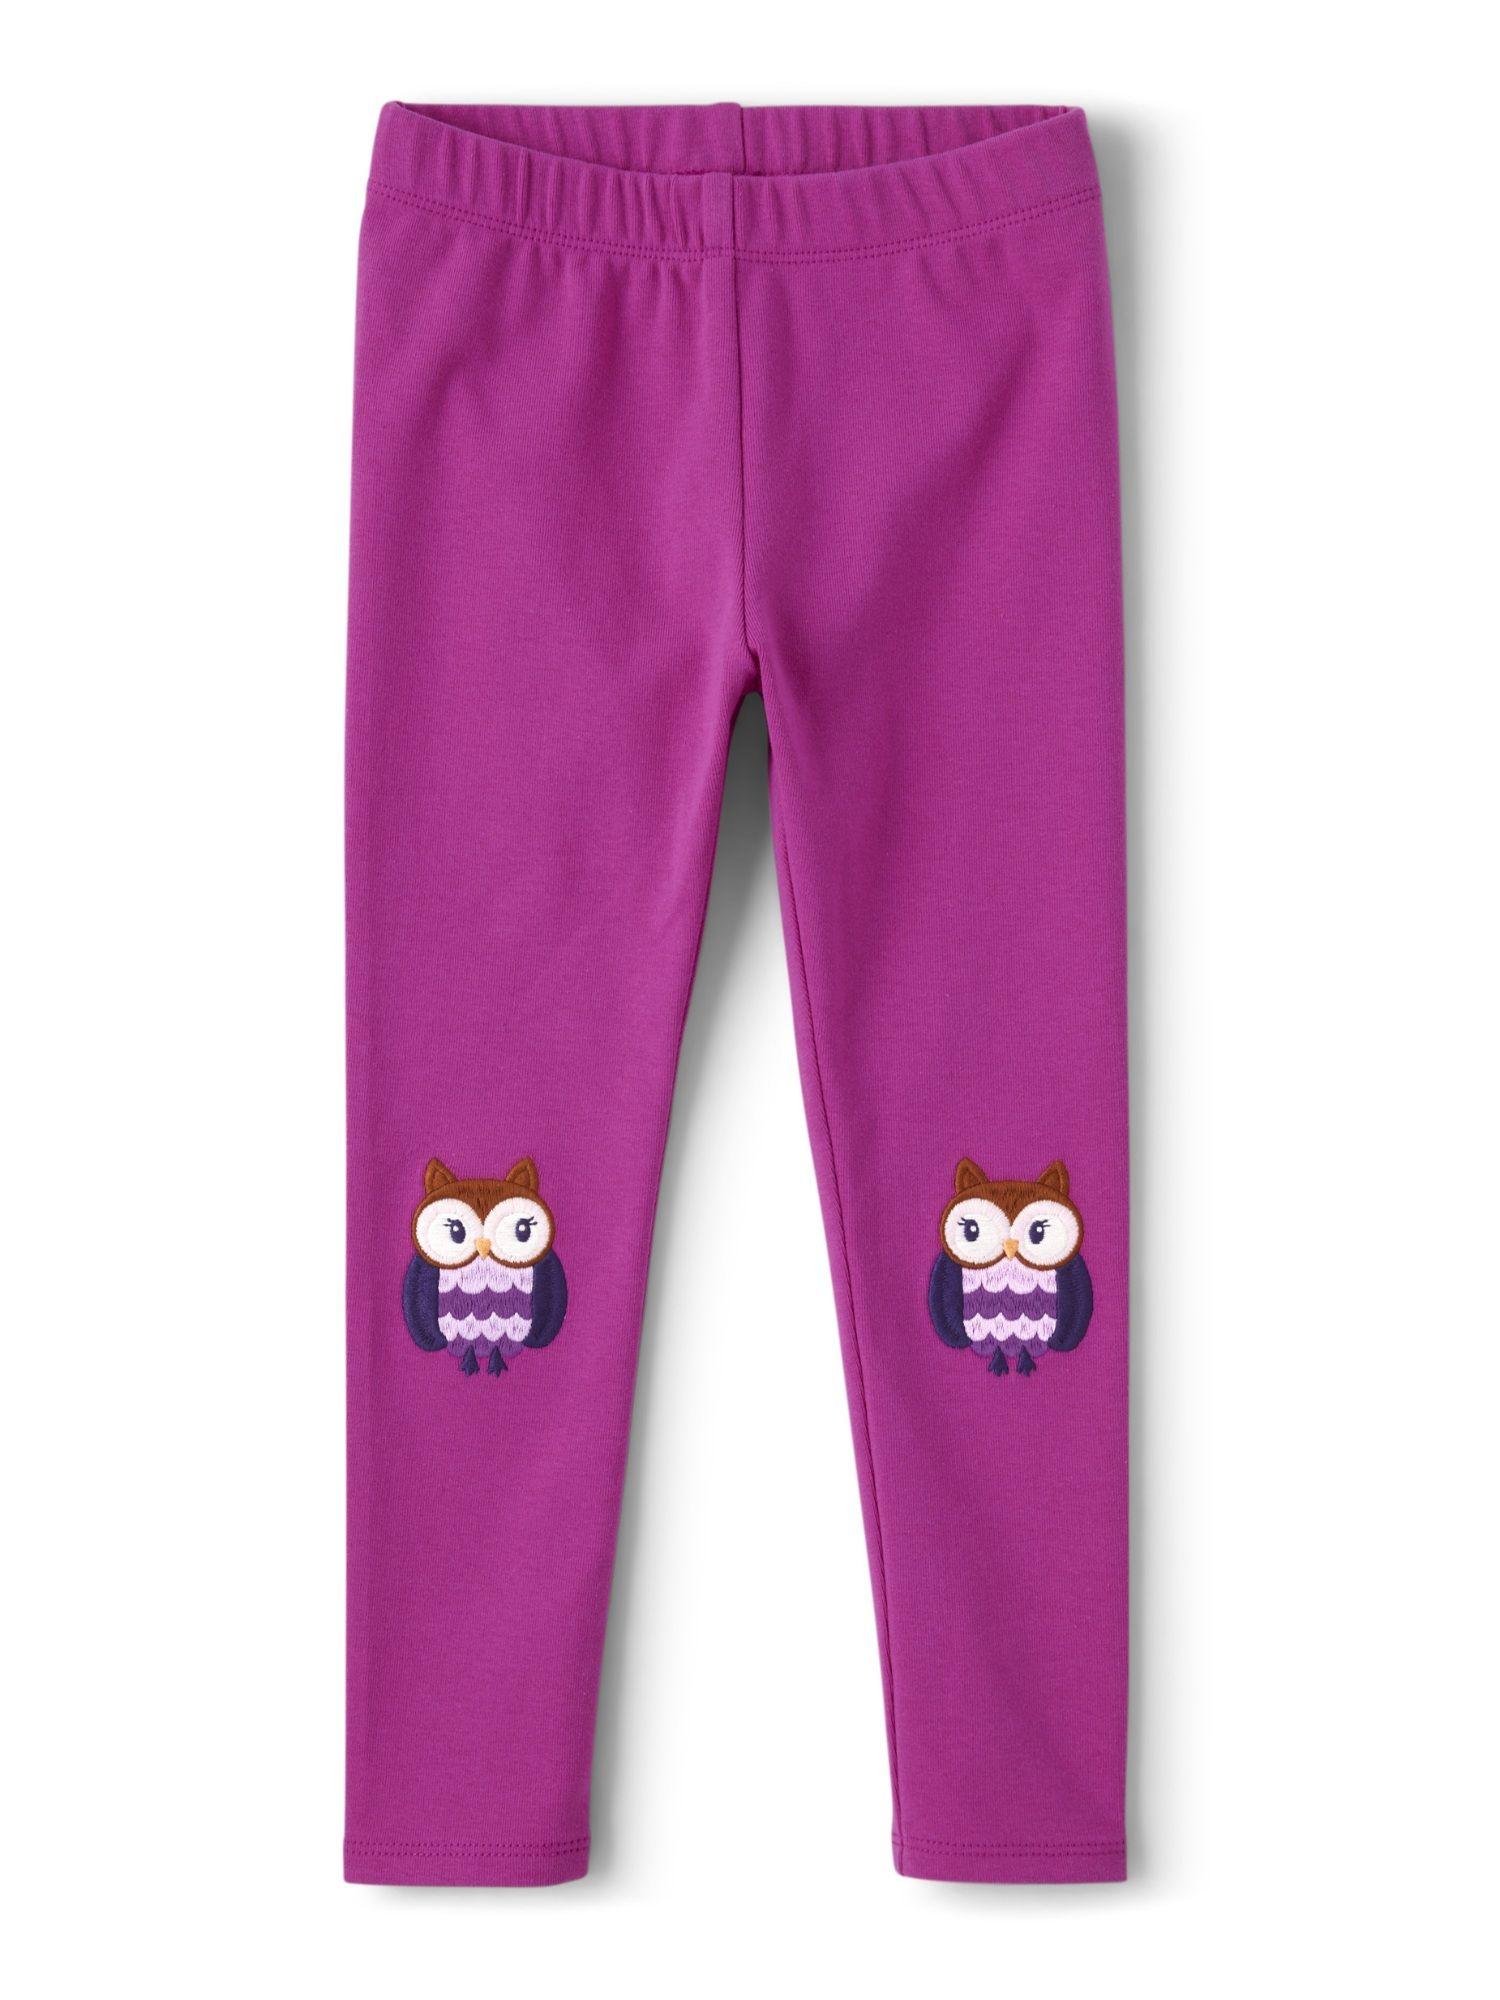 girls purple leggings with embroidered owl motif (12-18 months)